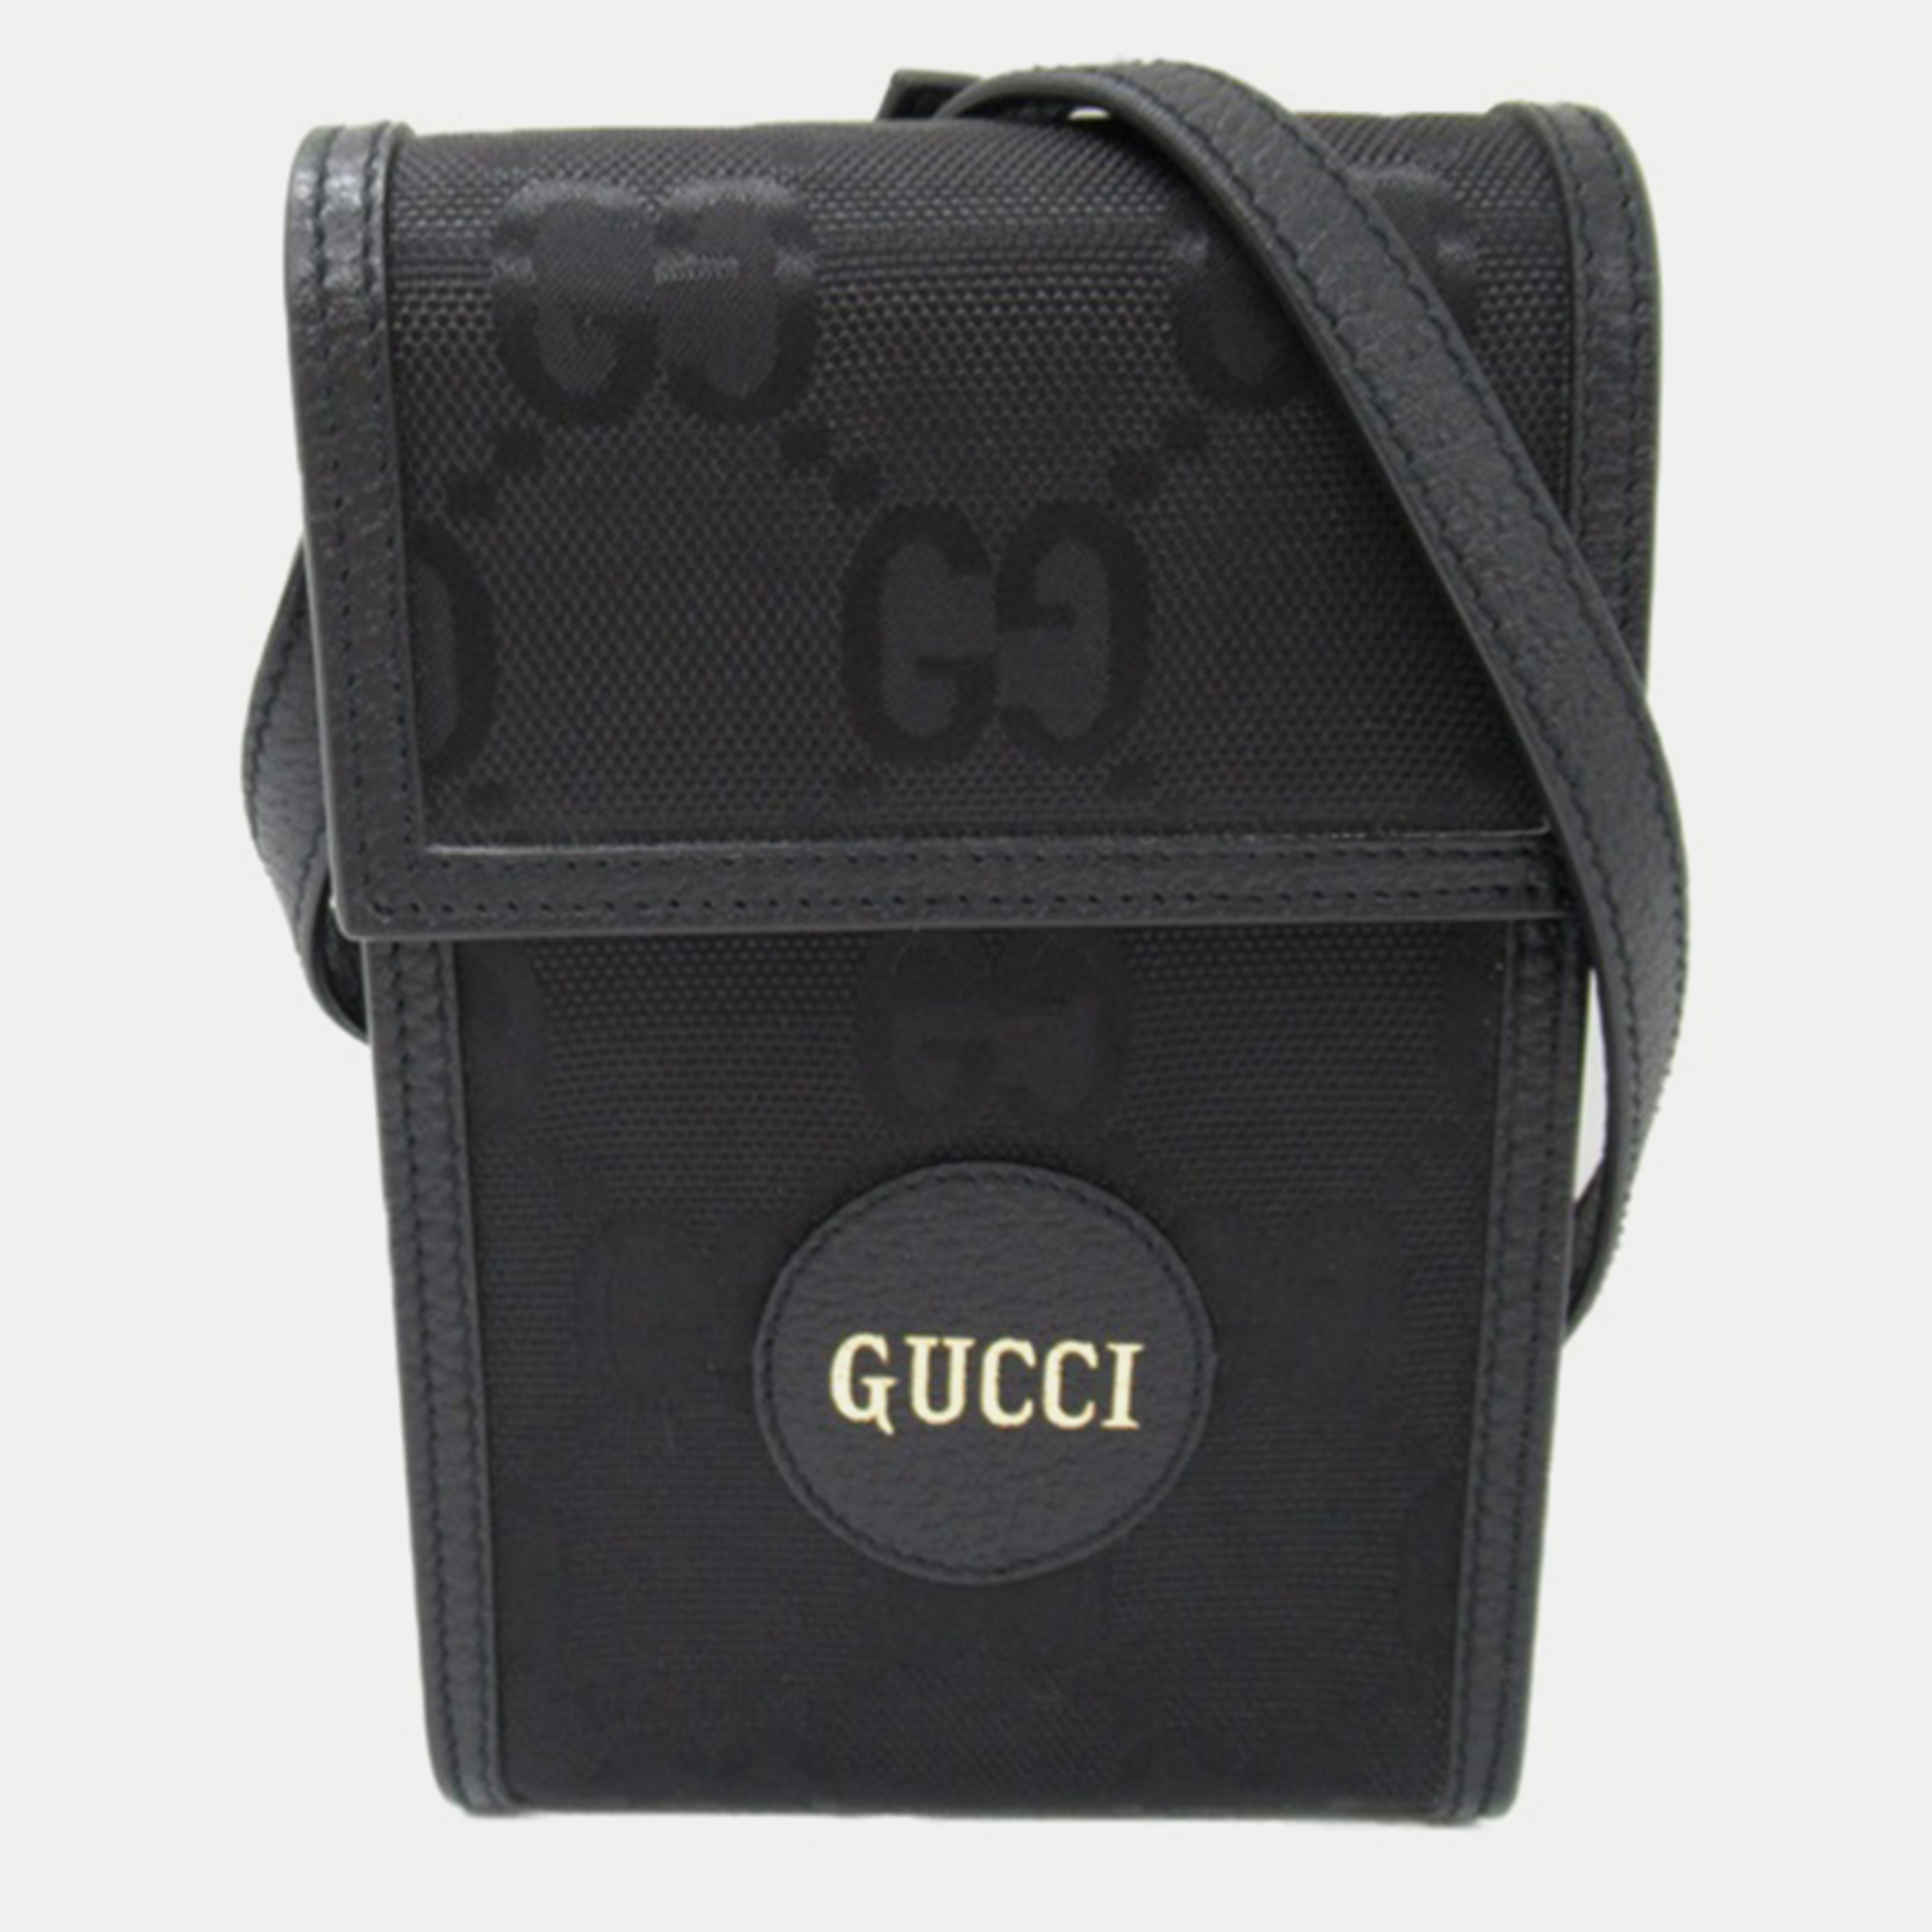 Gucci black leather gg off the grid crossbody bag